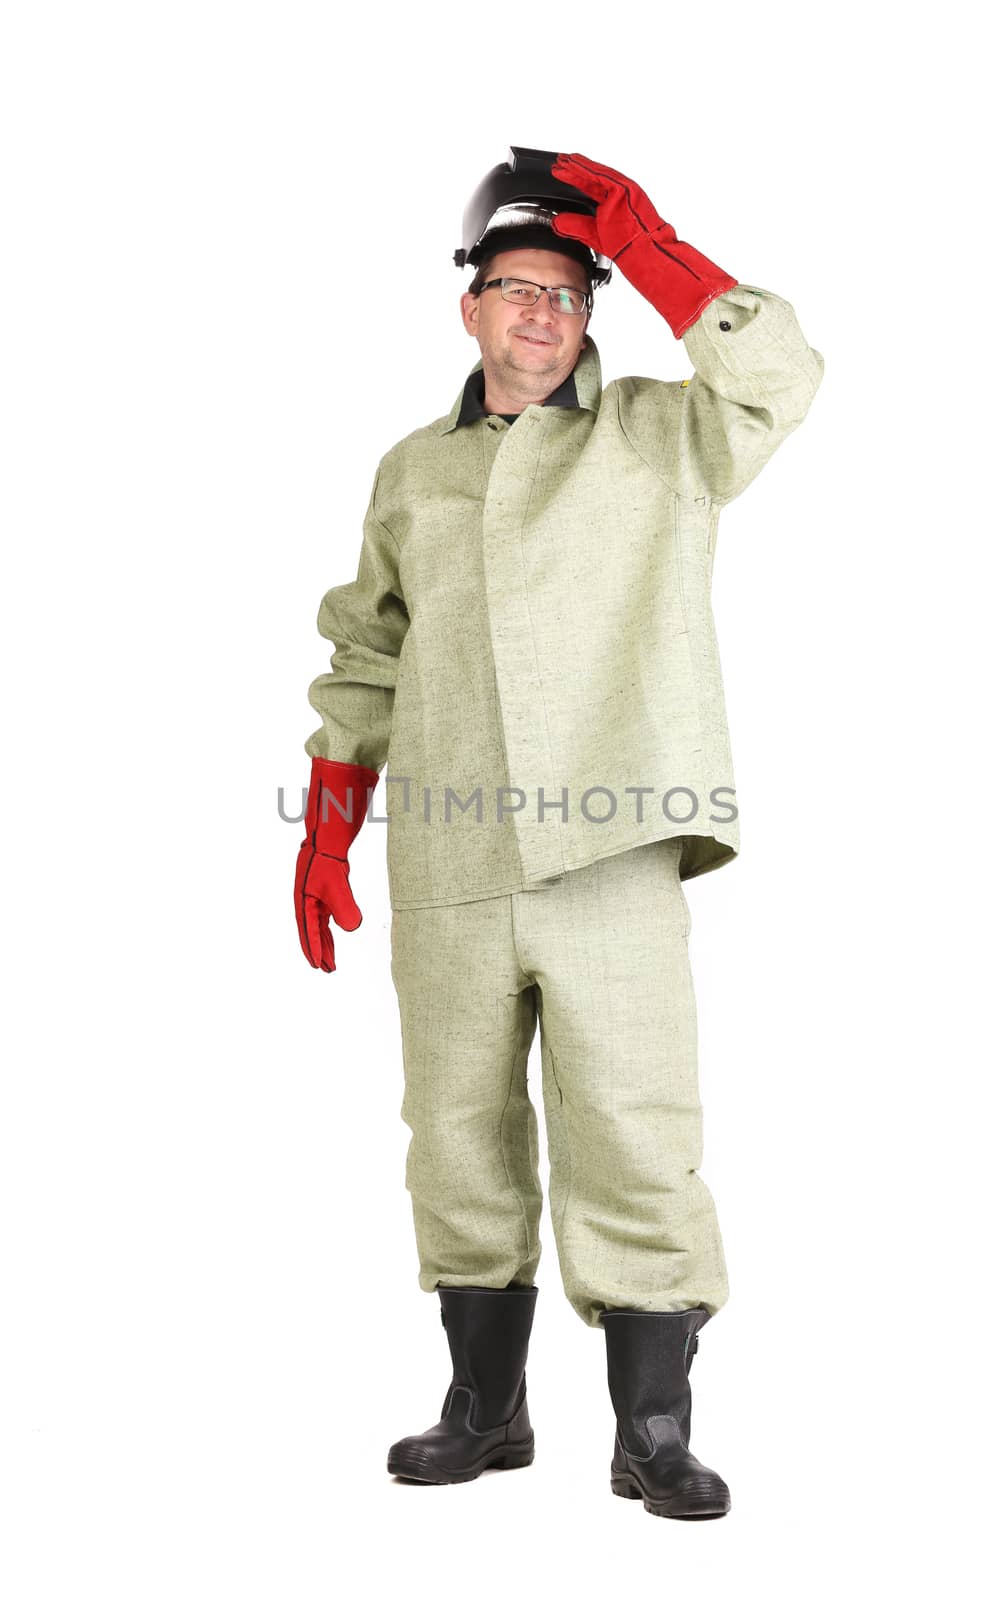 Smiling welder. Isolated on a white background.